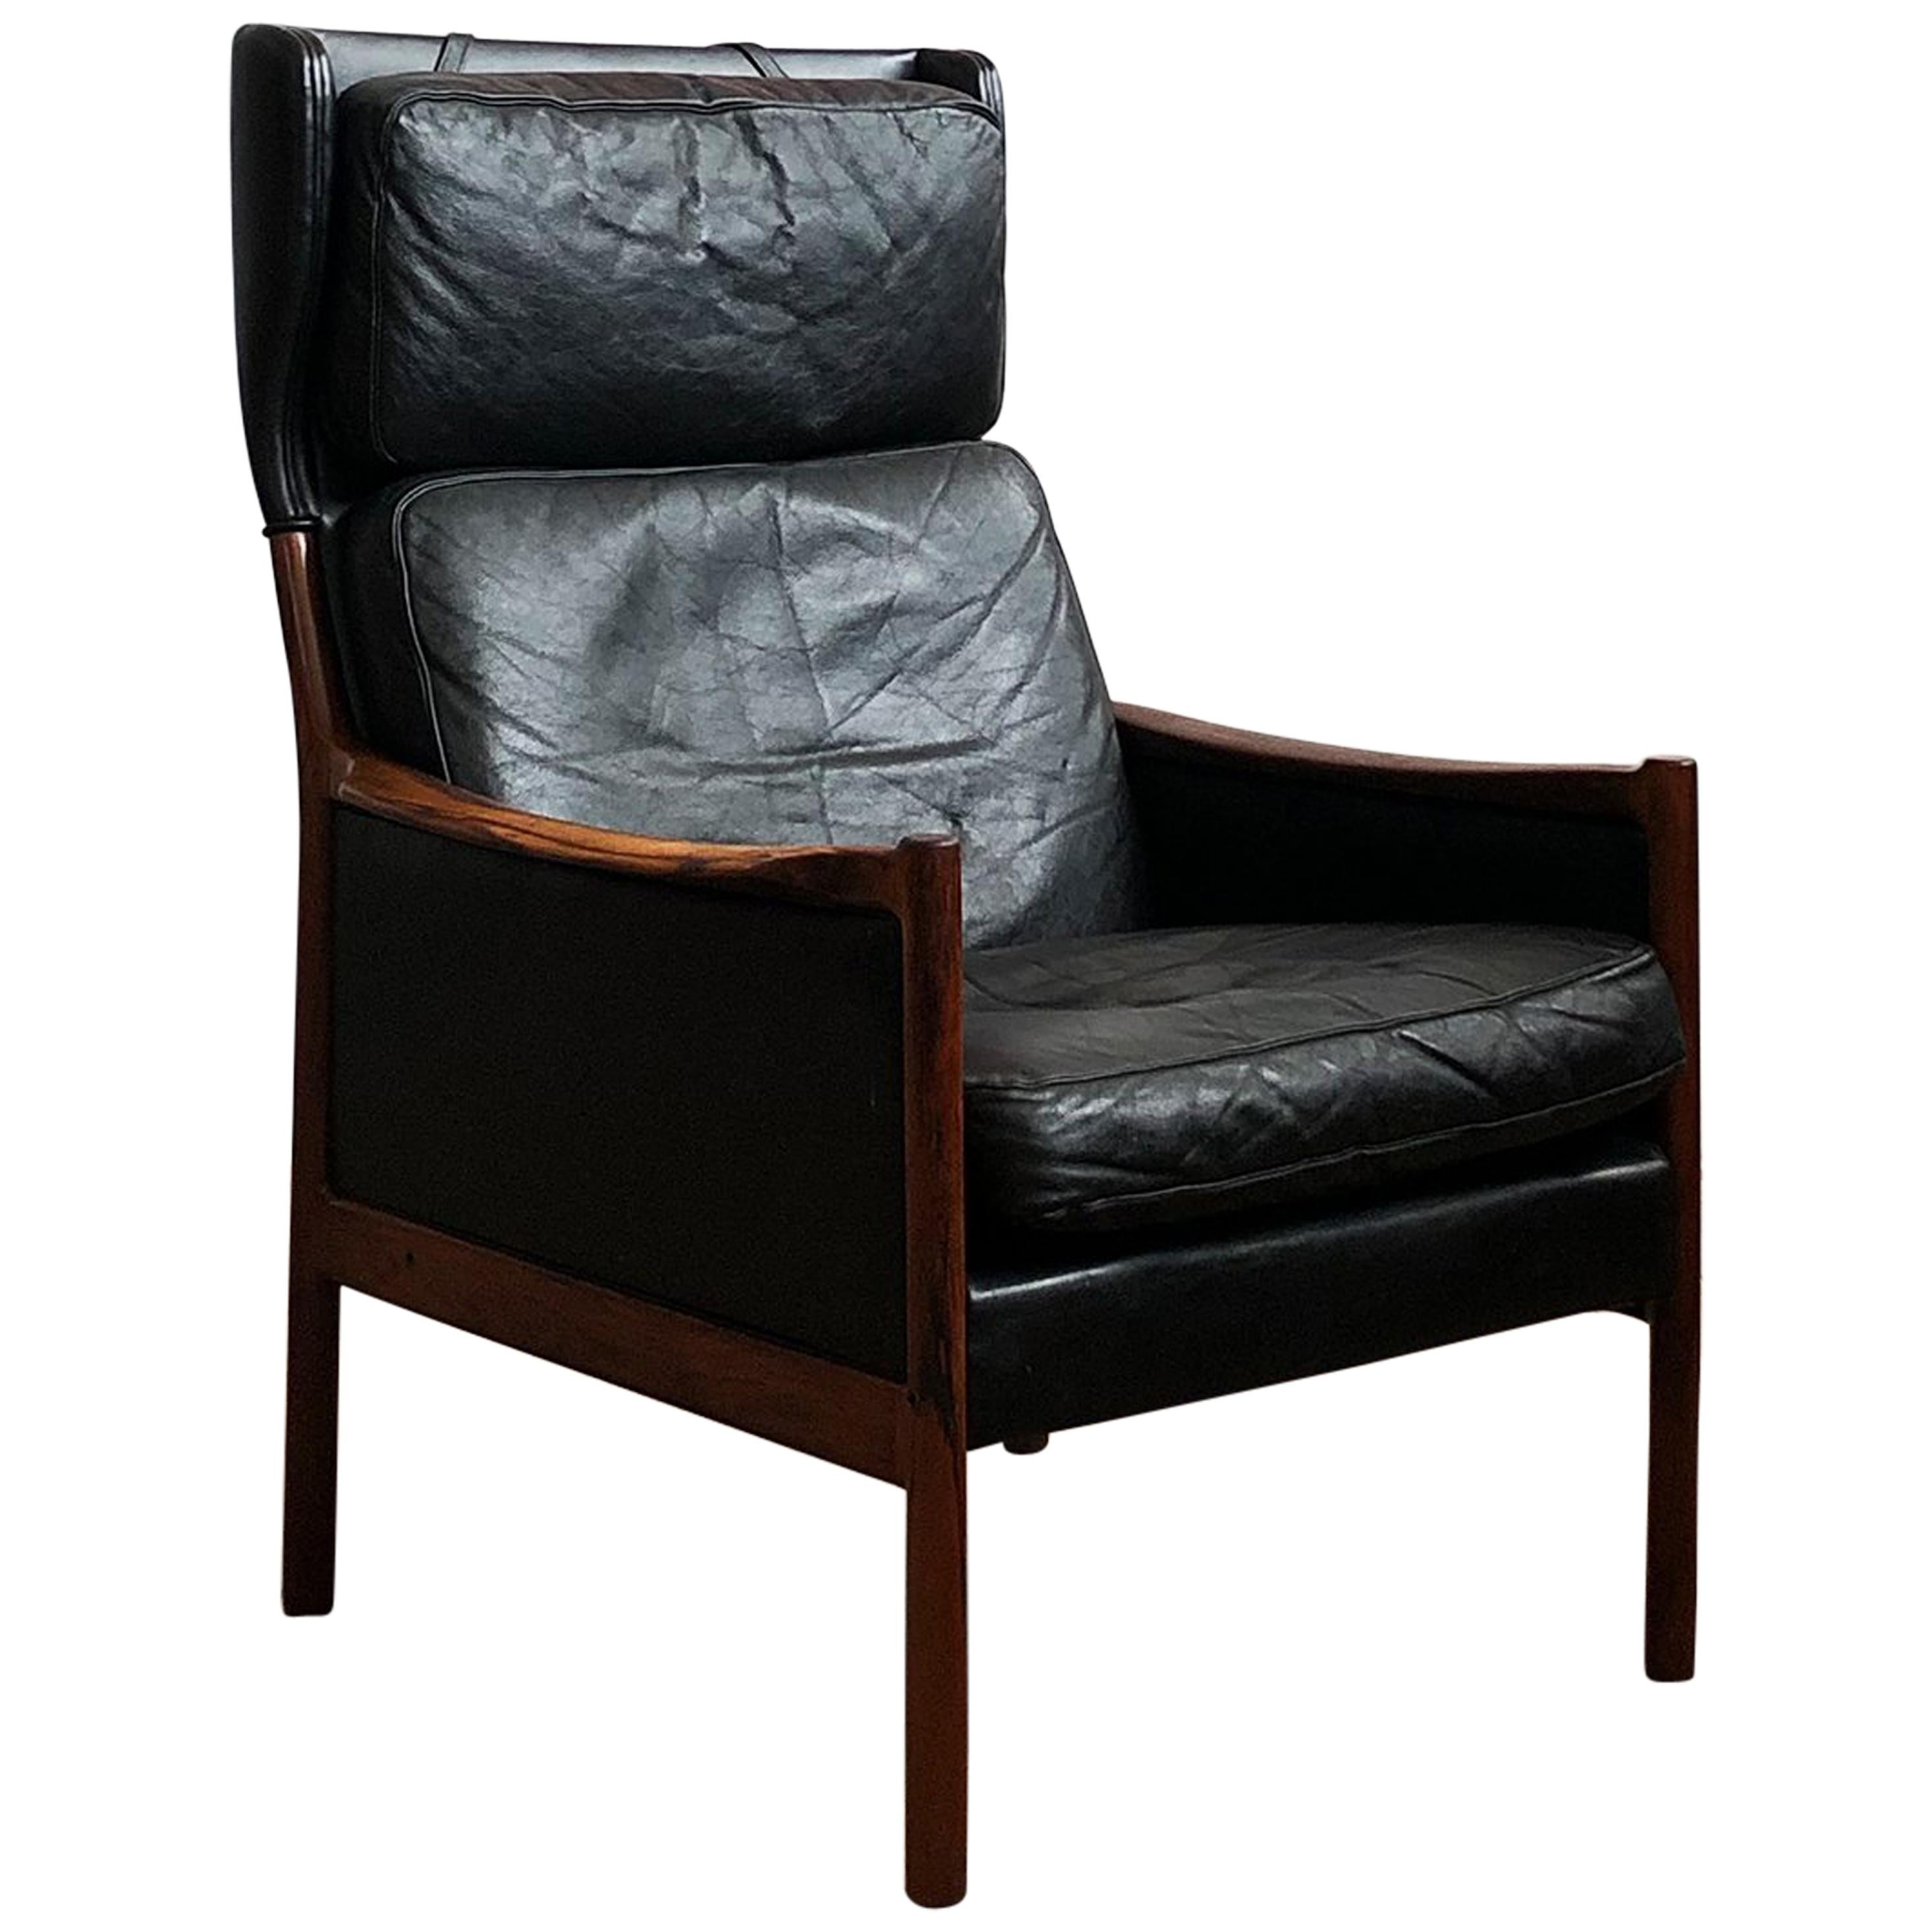 Danish Mid-Century Modern Rosewood and Black Leather Lounge Chair For Sale